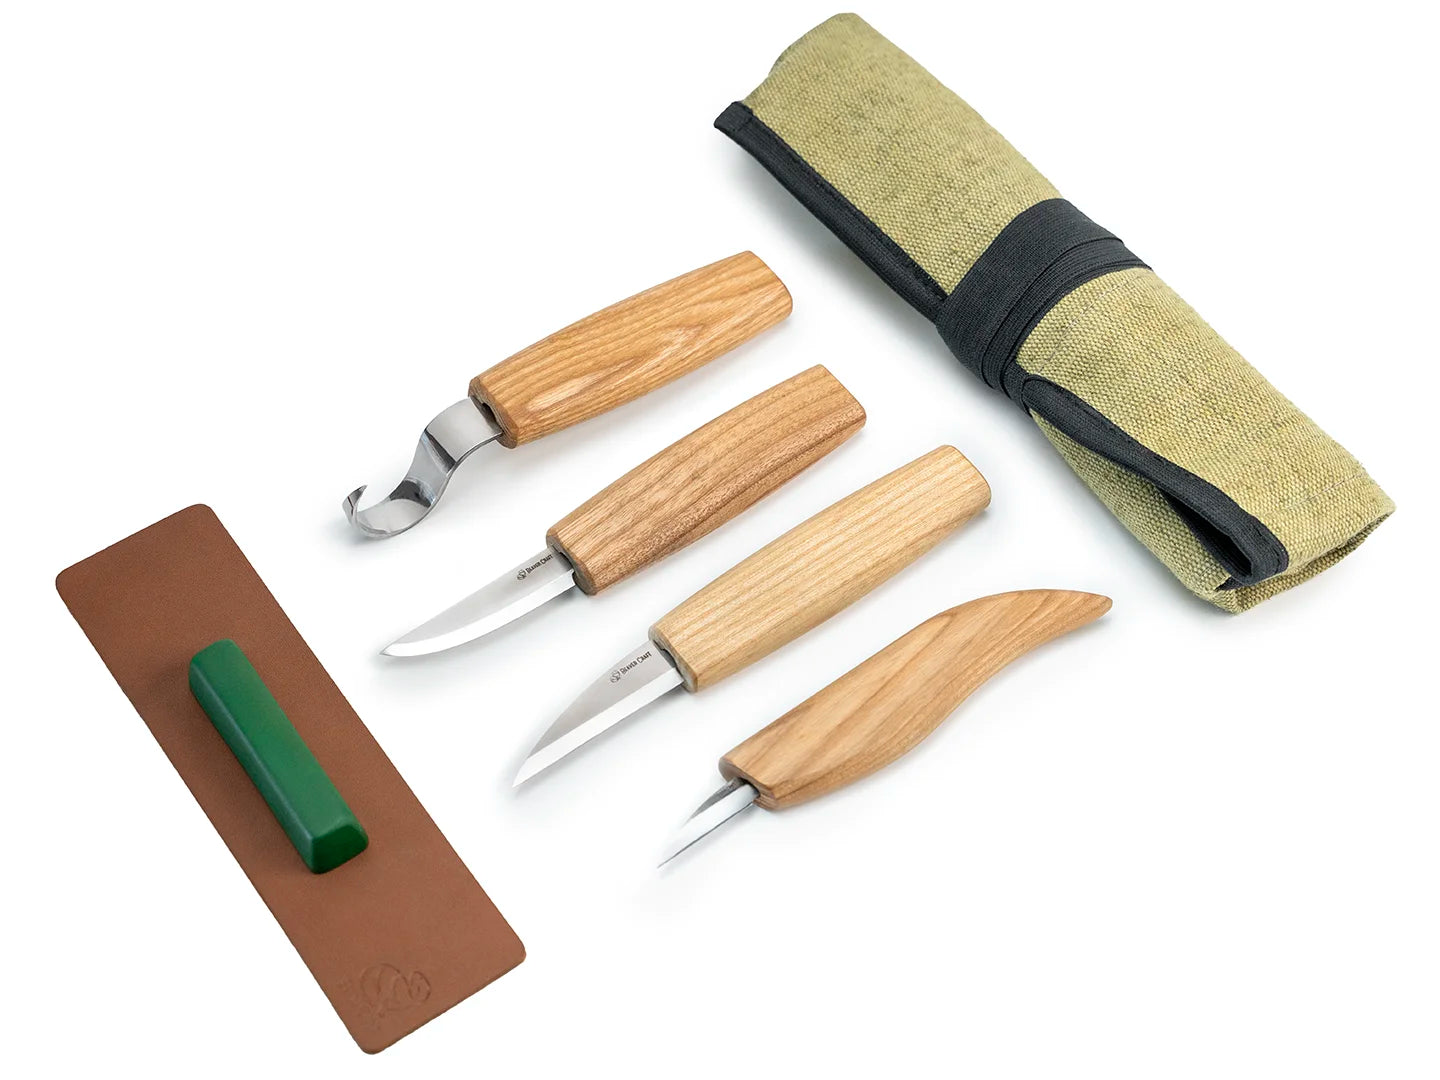 8 PCS Wood Carving Tools Set Wood Carving kits for Beginners and  Professionals, Tools Roll Contains 4 pcs Wood Carving Knives, Polishing  compound and